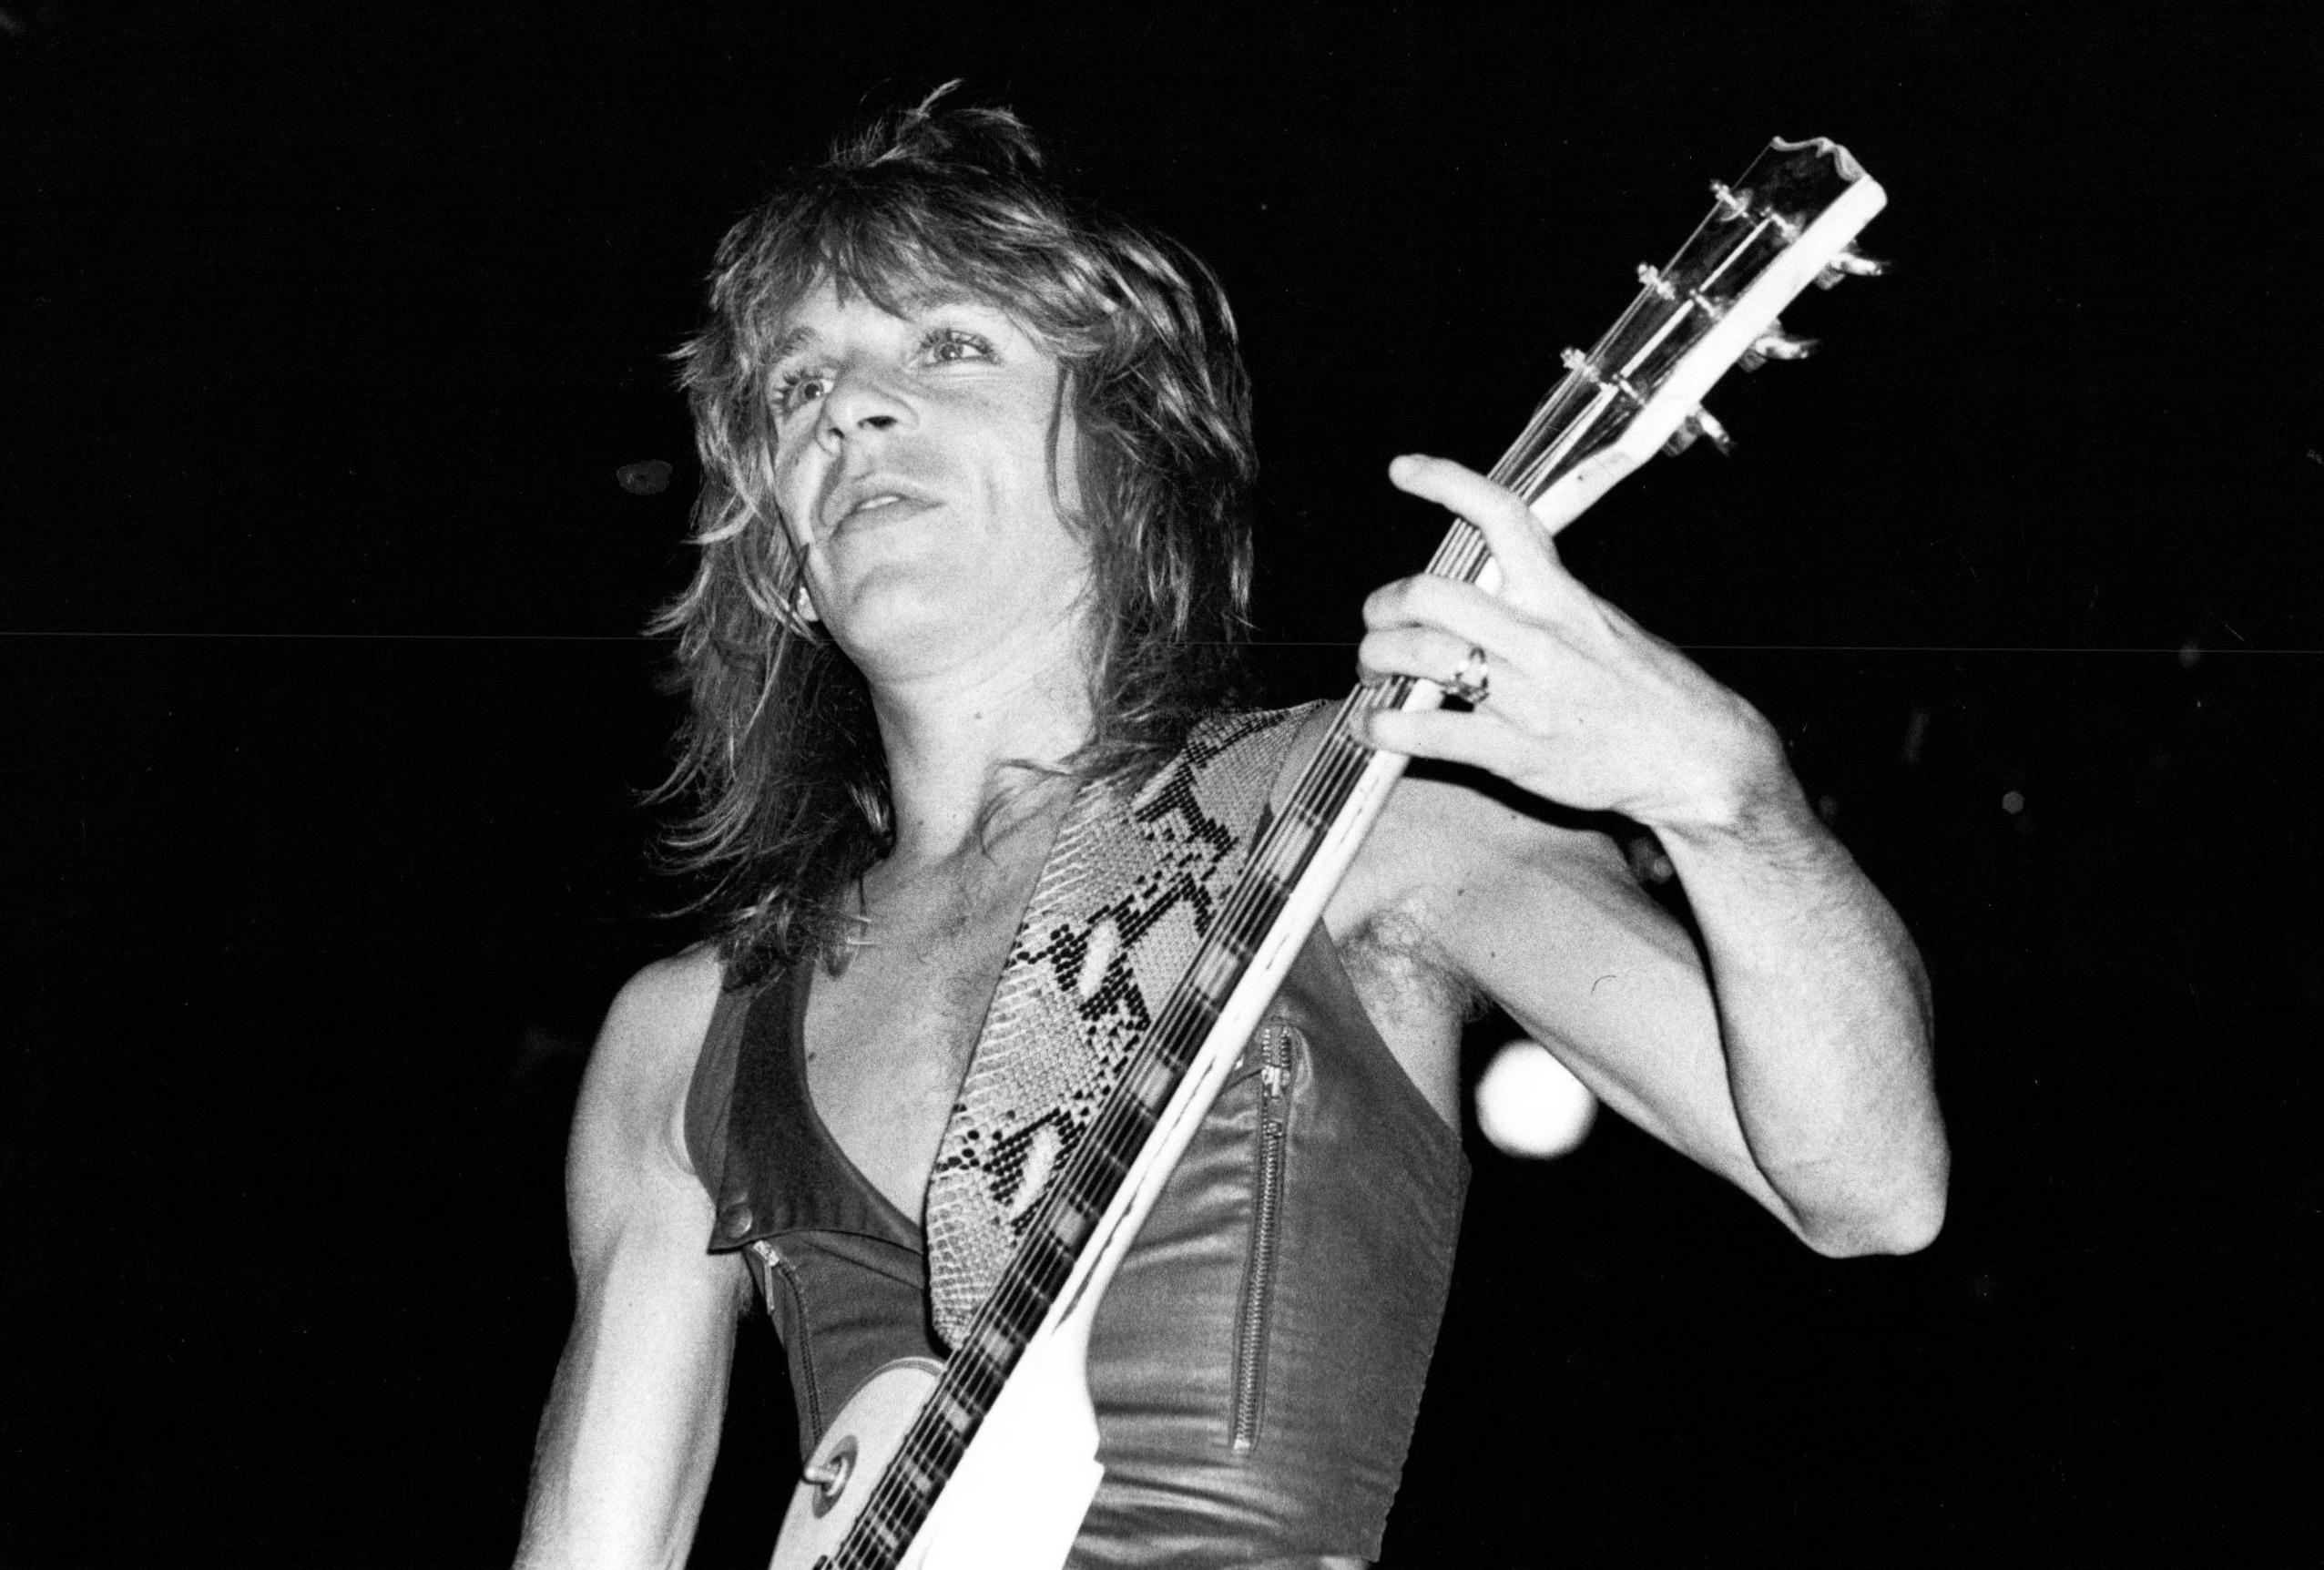 Gary Gershoff Black and White Photograph - Randy Rhoads Playing Guitar on Stage Vintage Original Photograph